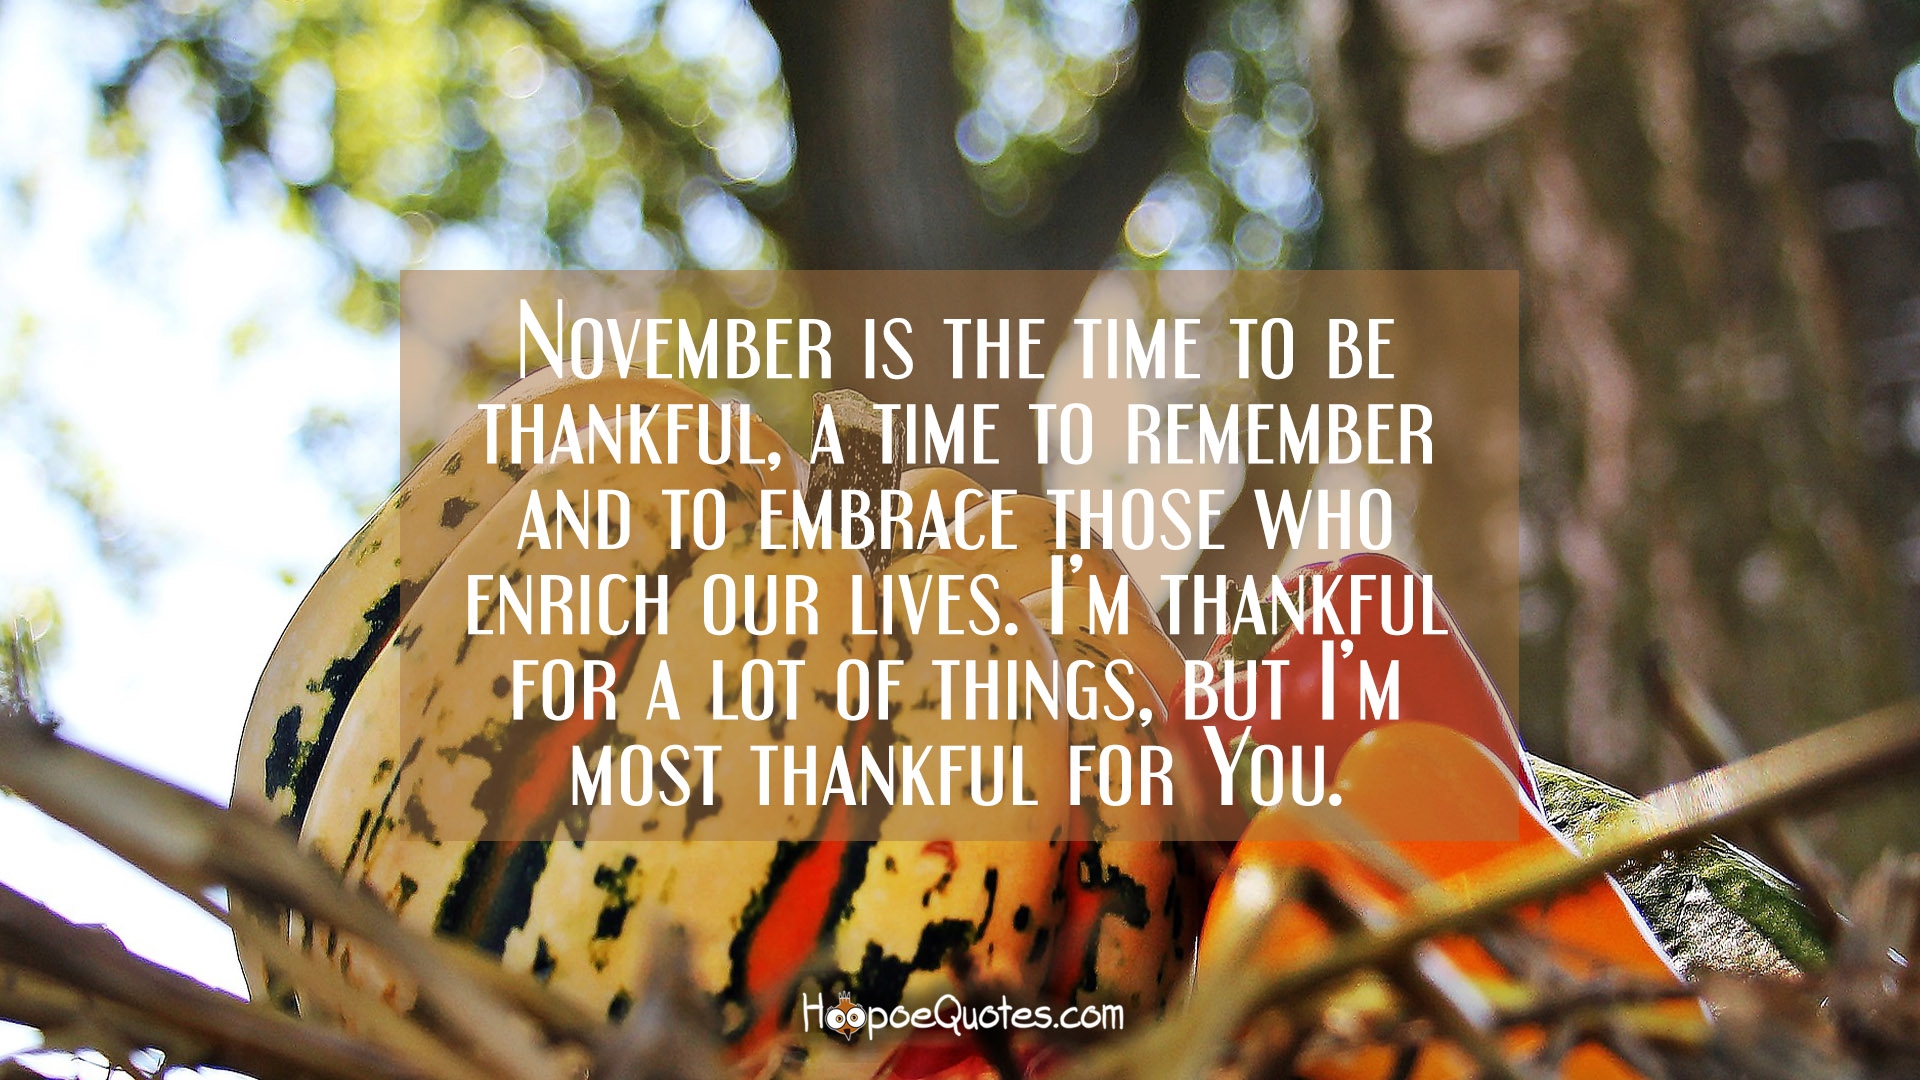 November is the time to be thankful, a time to remember ...